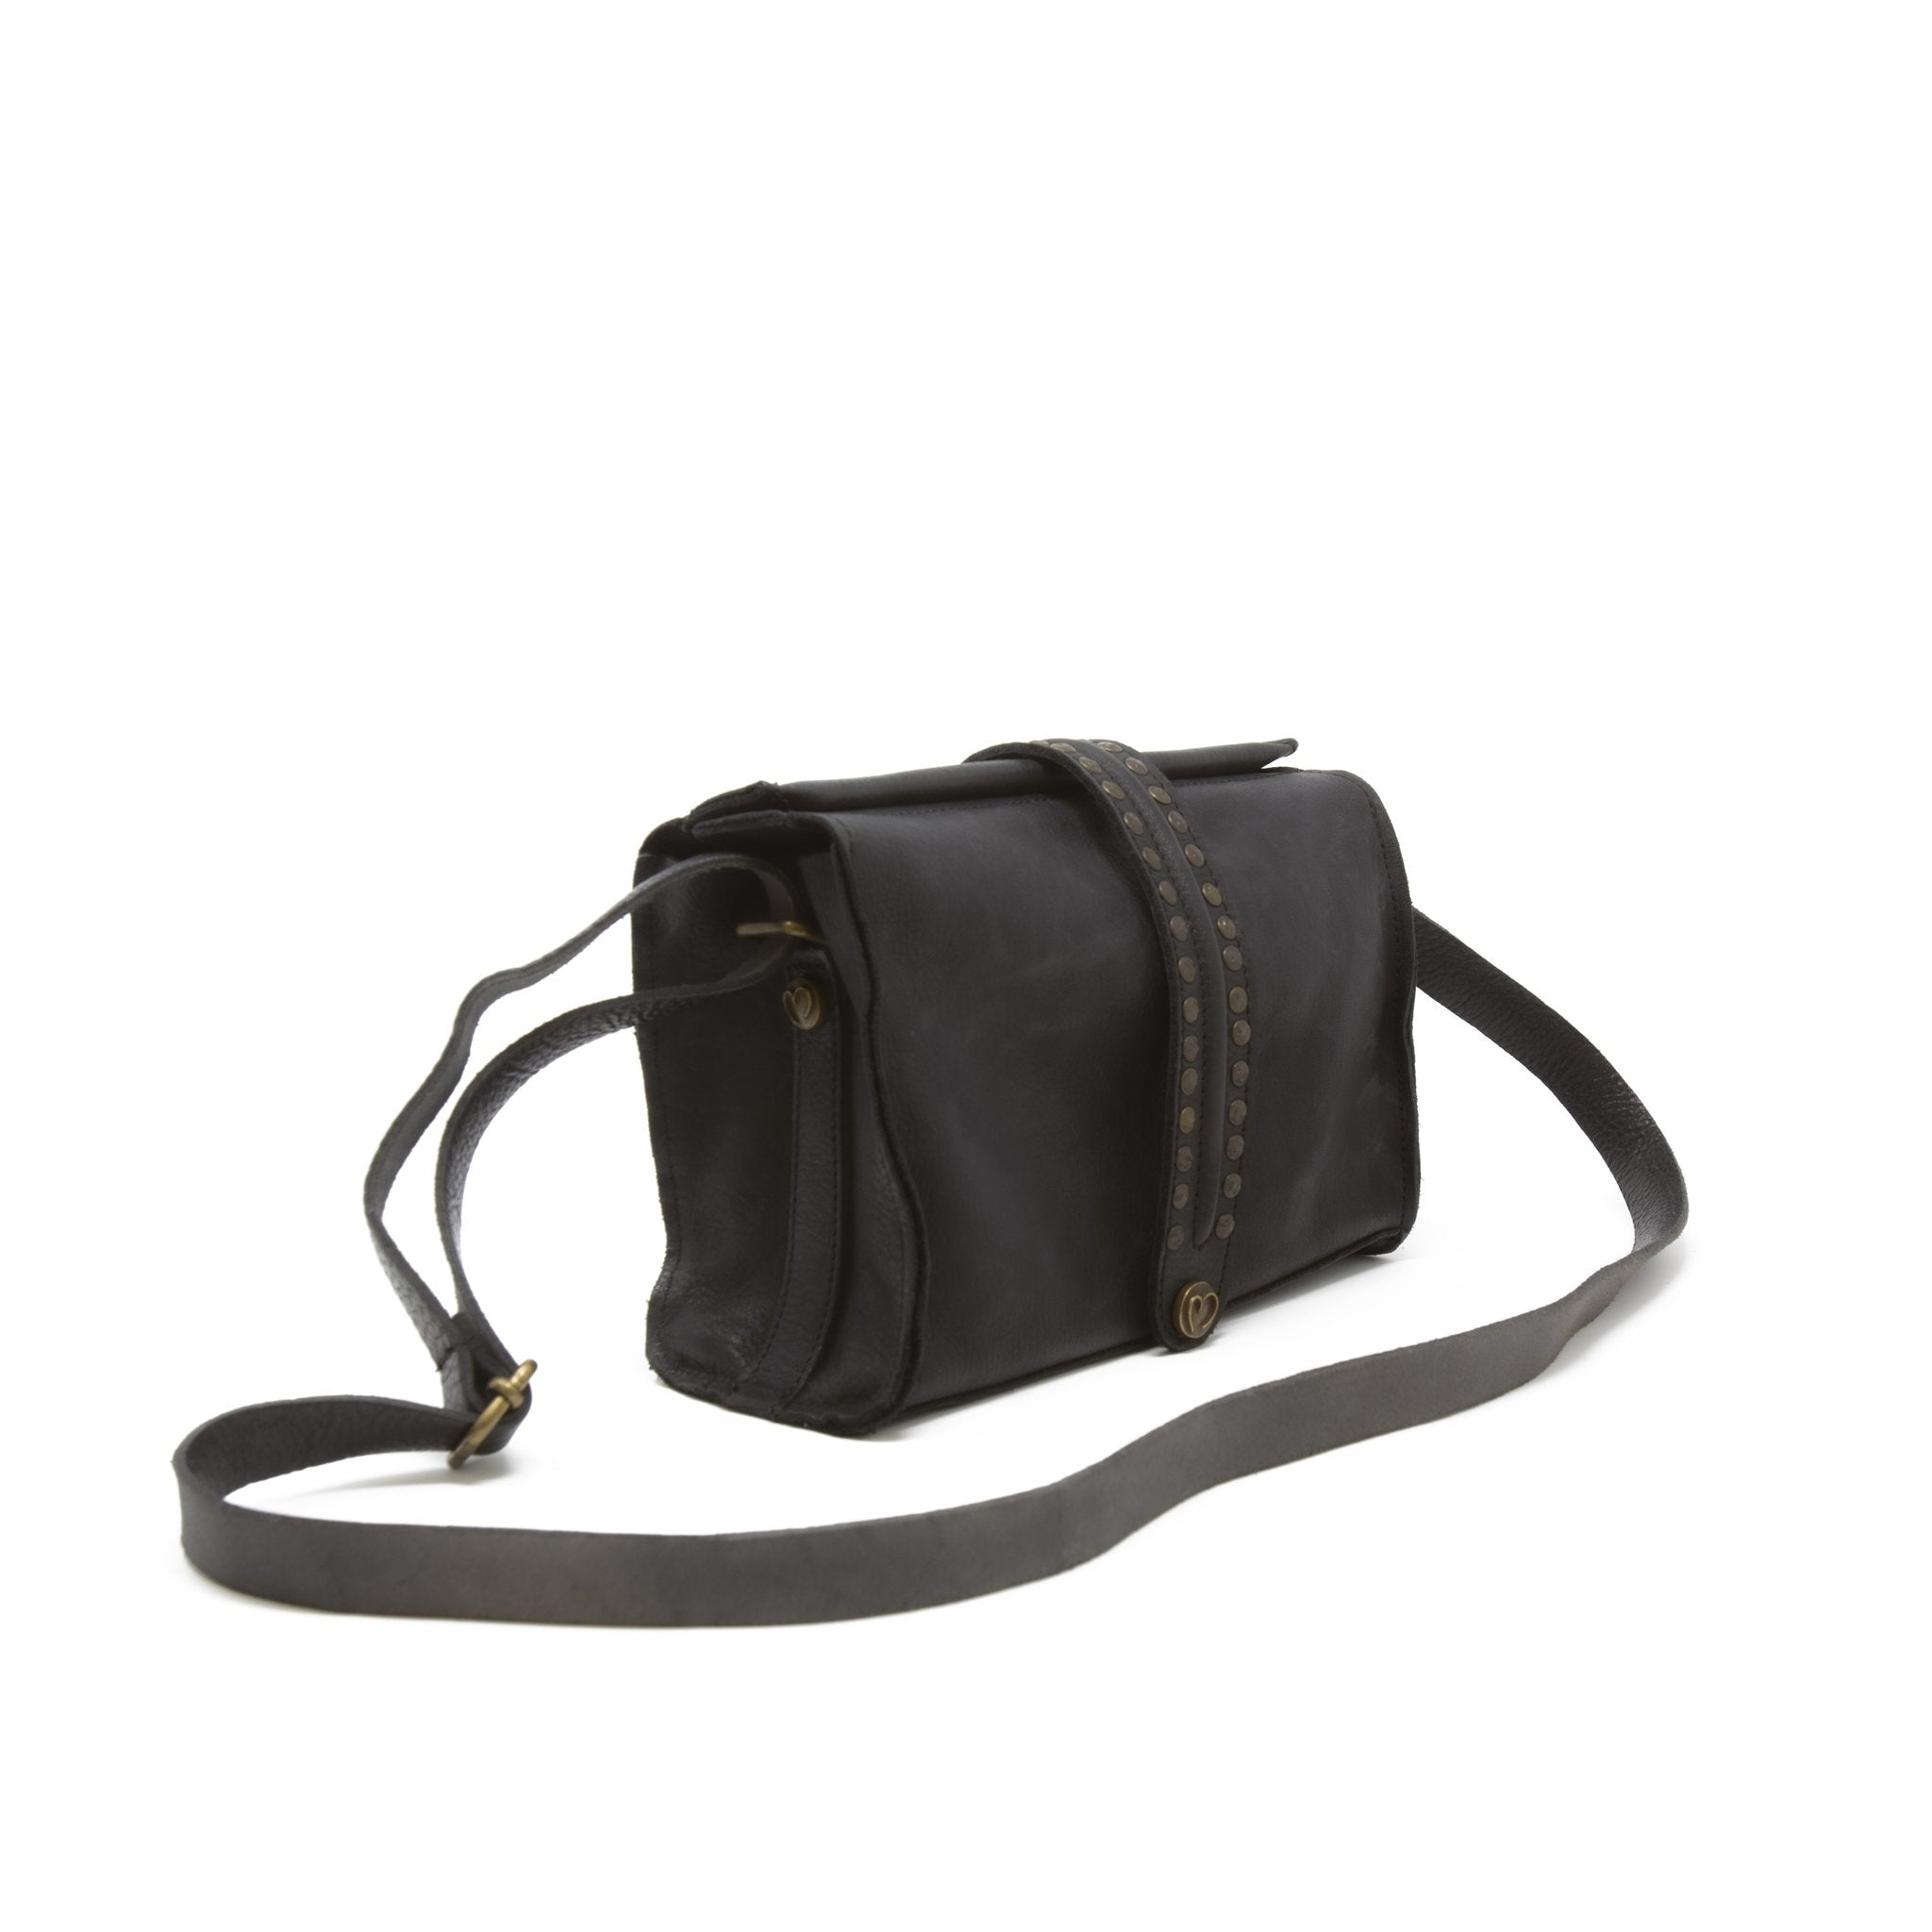 Marco Doctor Bag in Licorice Black Leather - Offhand Designs